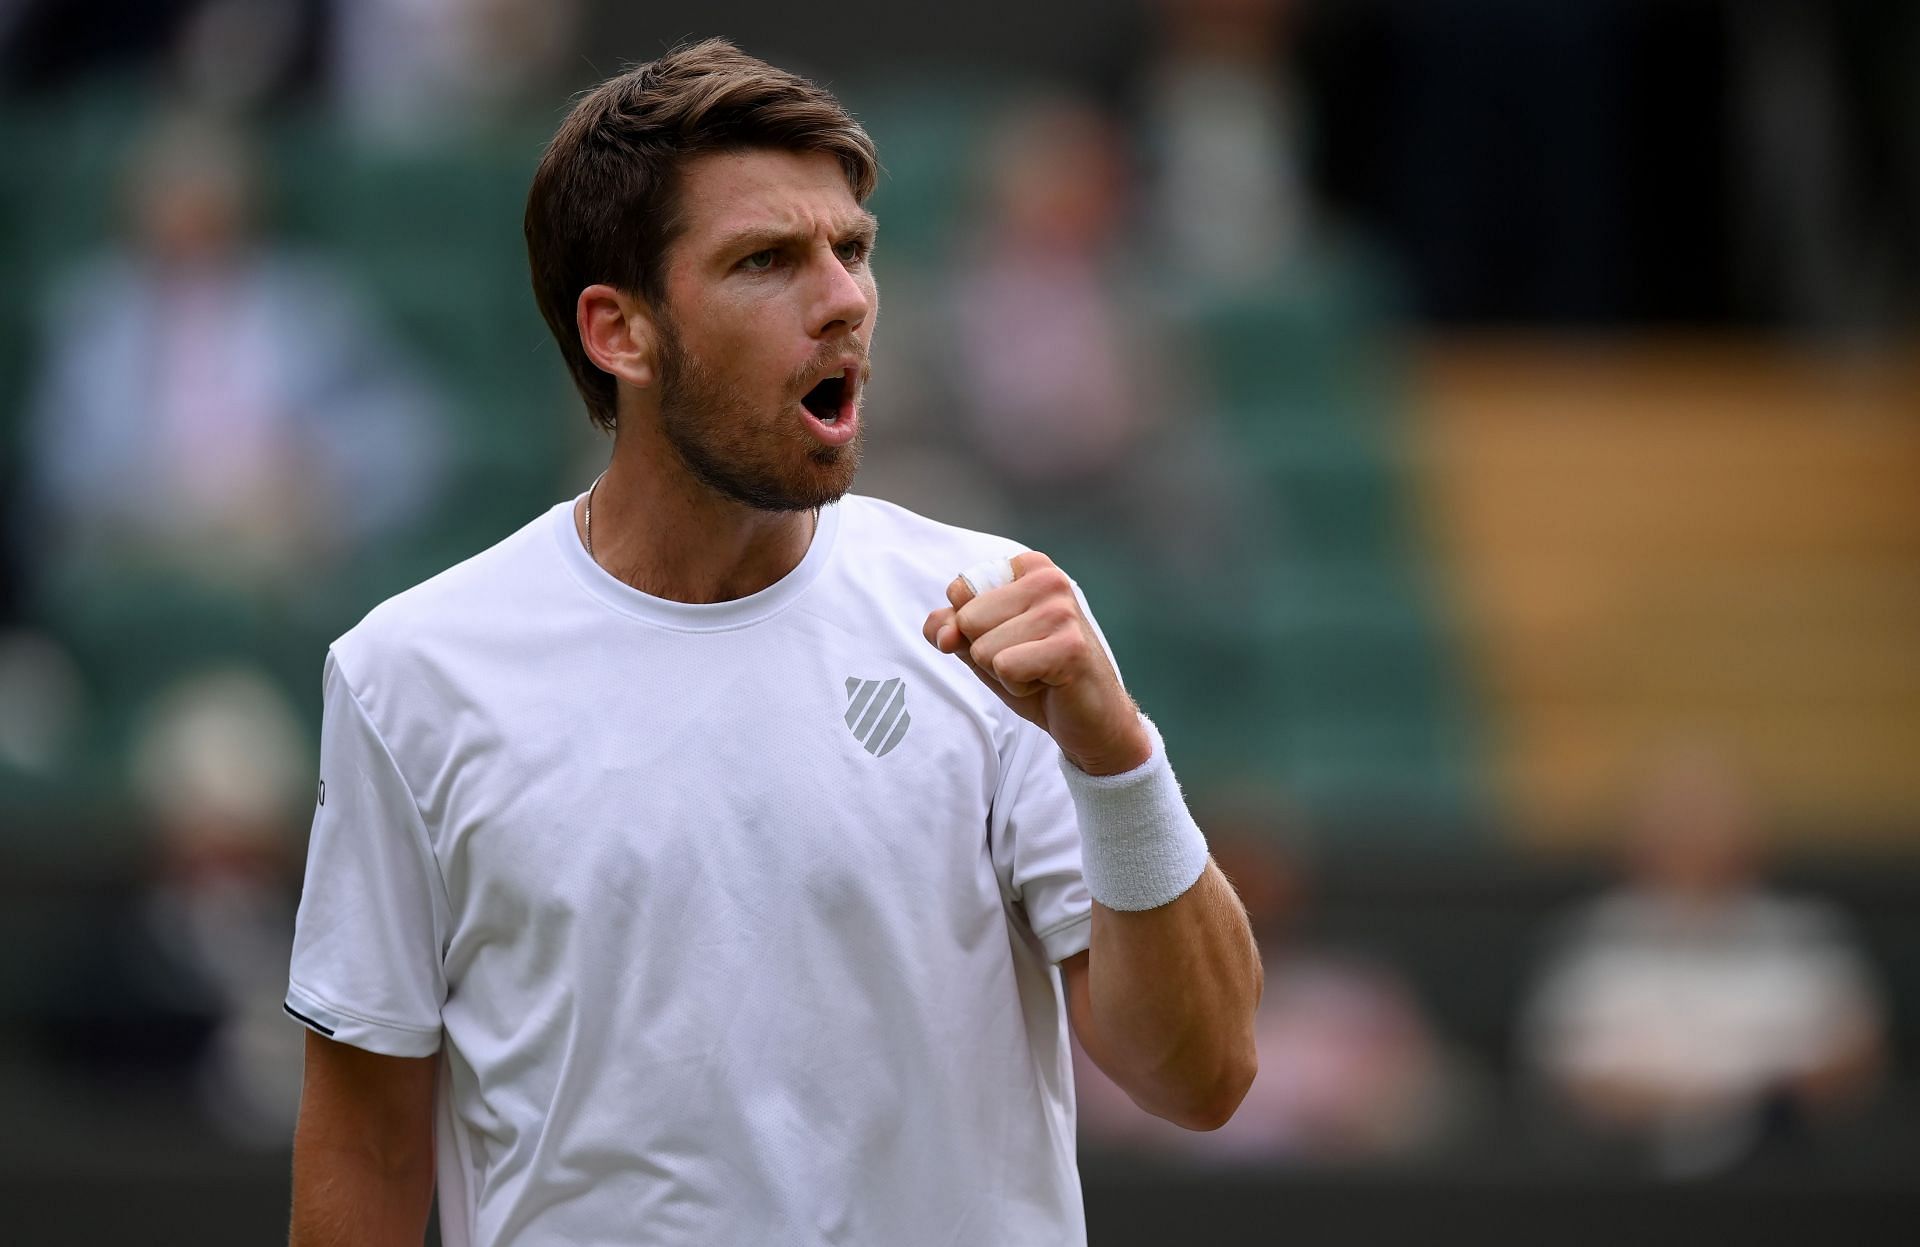 Cameron Norrie is the first Briton since Andy Murray in 2016 to reach the Wimbledon semifinals.